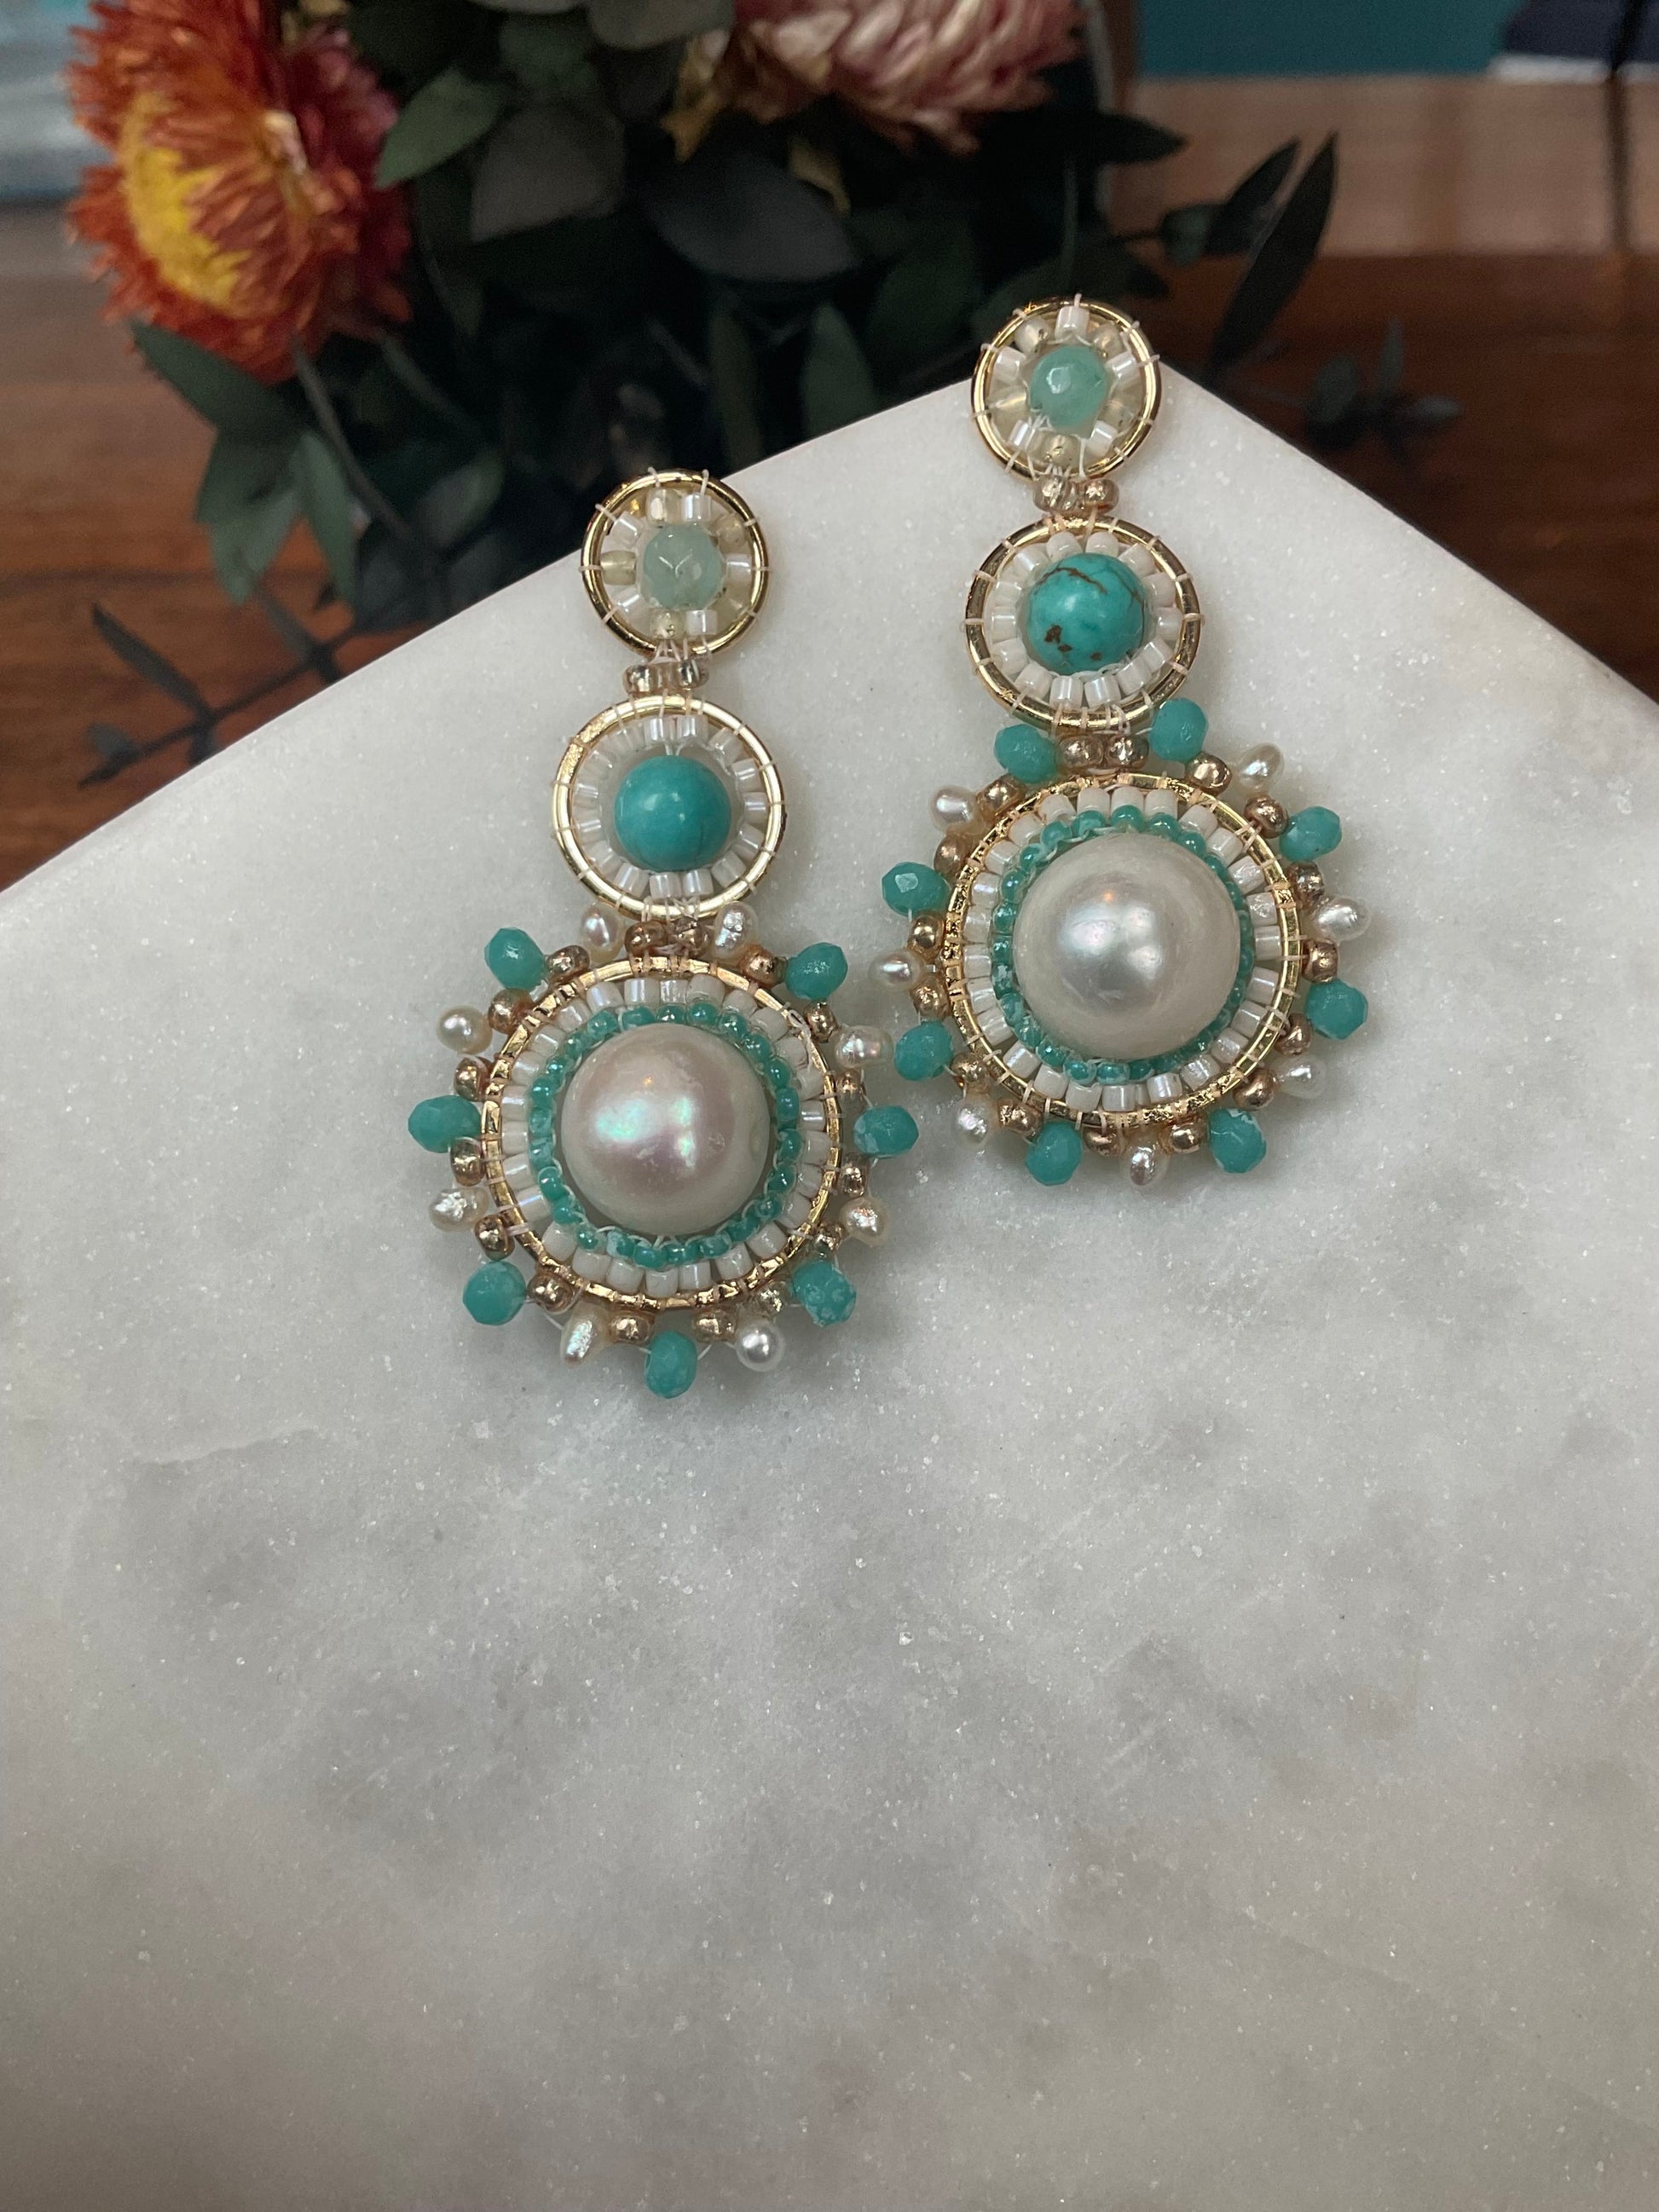 High grade pearls, turquoise stone beads and amazonite stone beads on gold-filled frames with interwoven Miyuki beads. unique and one of a kind